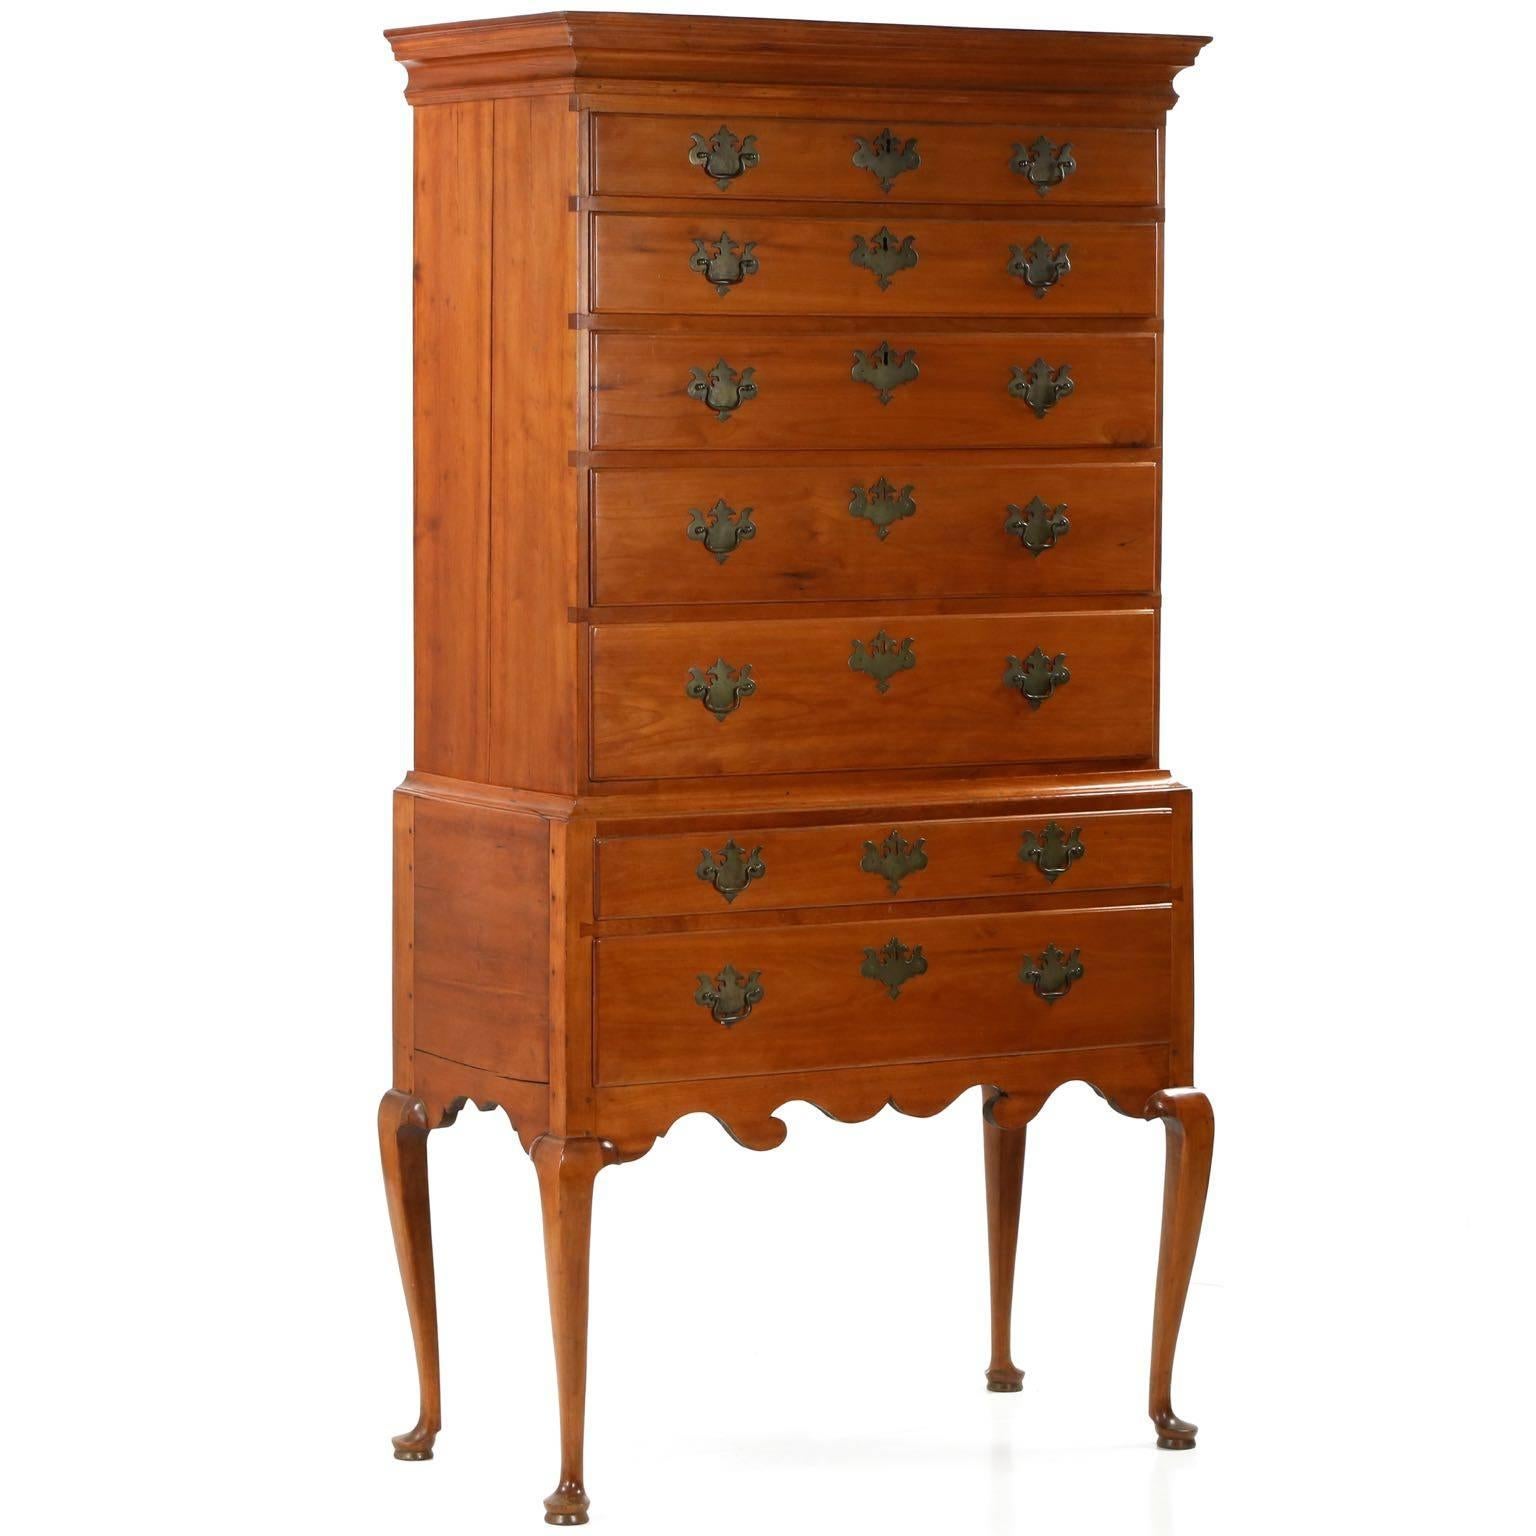 Fine American Queen Anne Cherry Highboy Chest of Drawers, New England